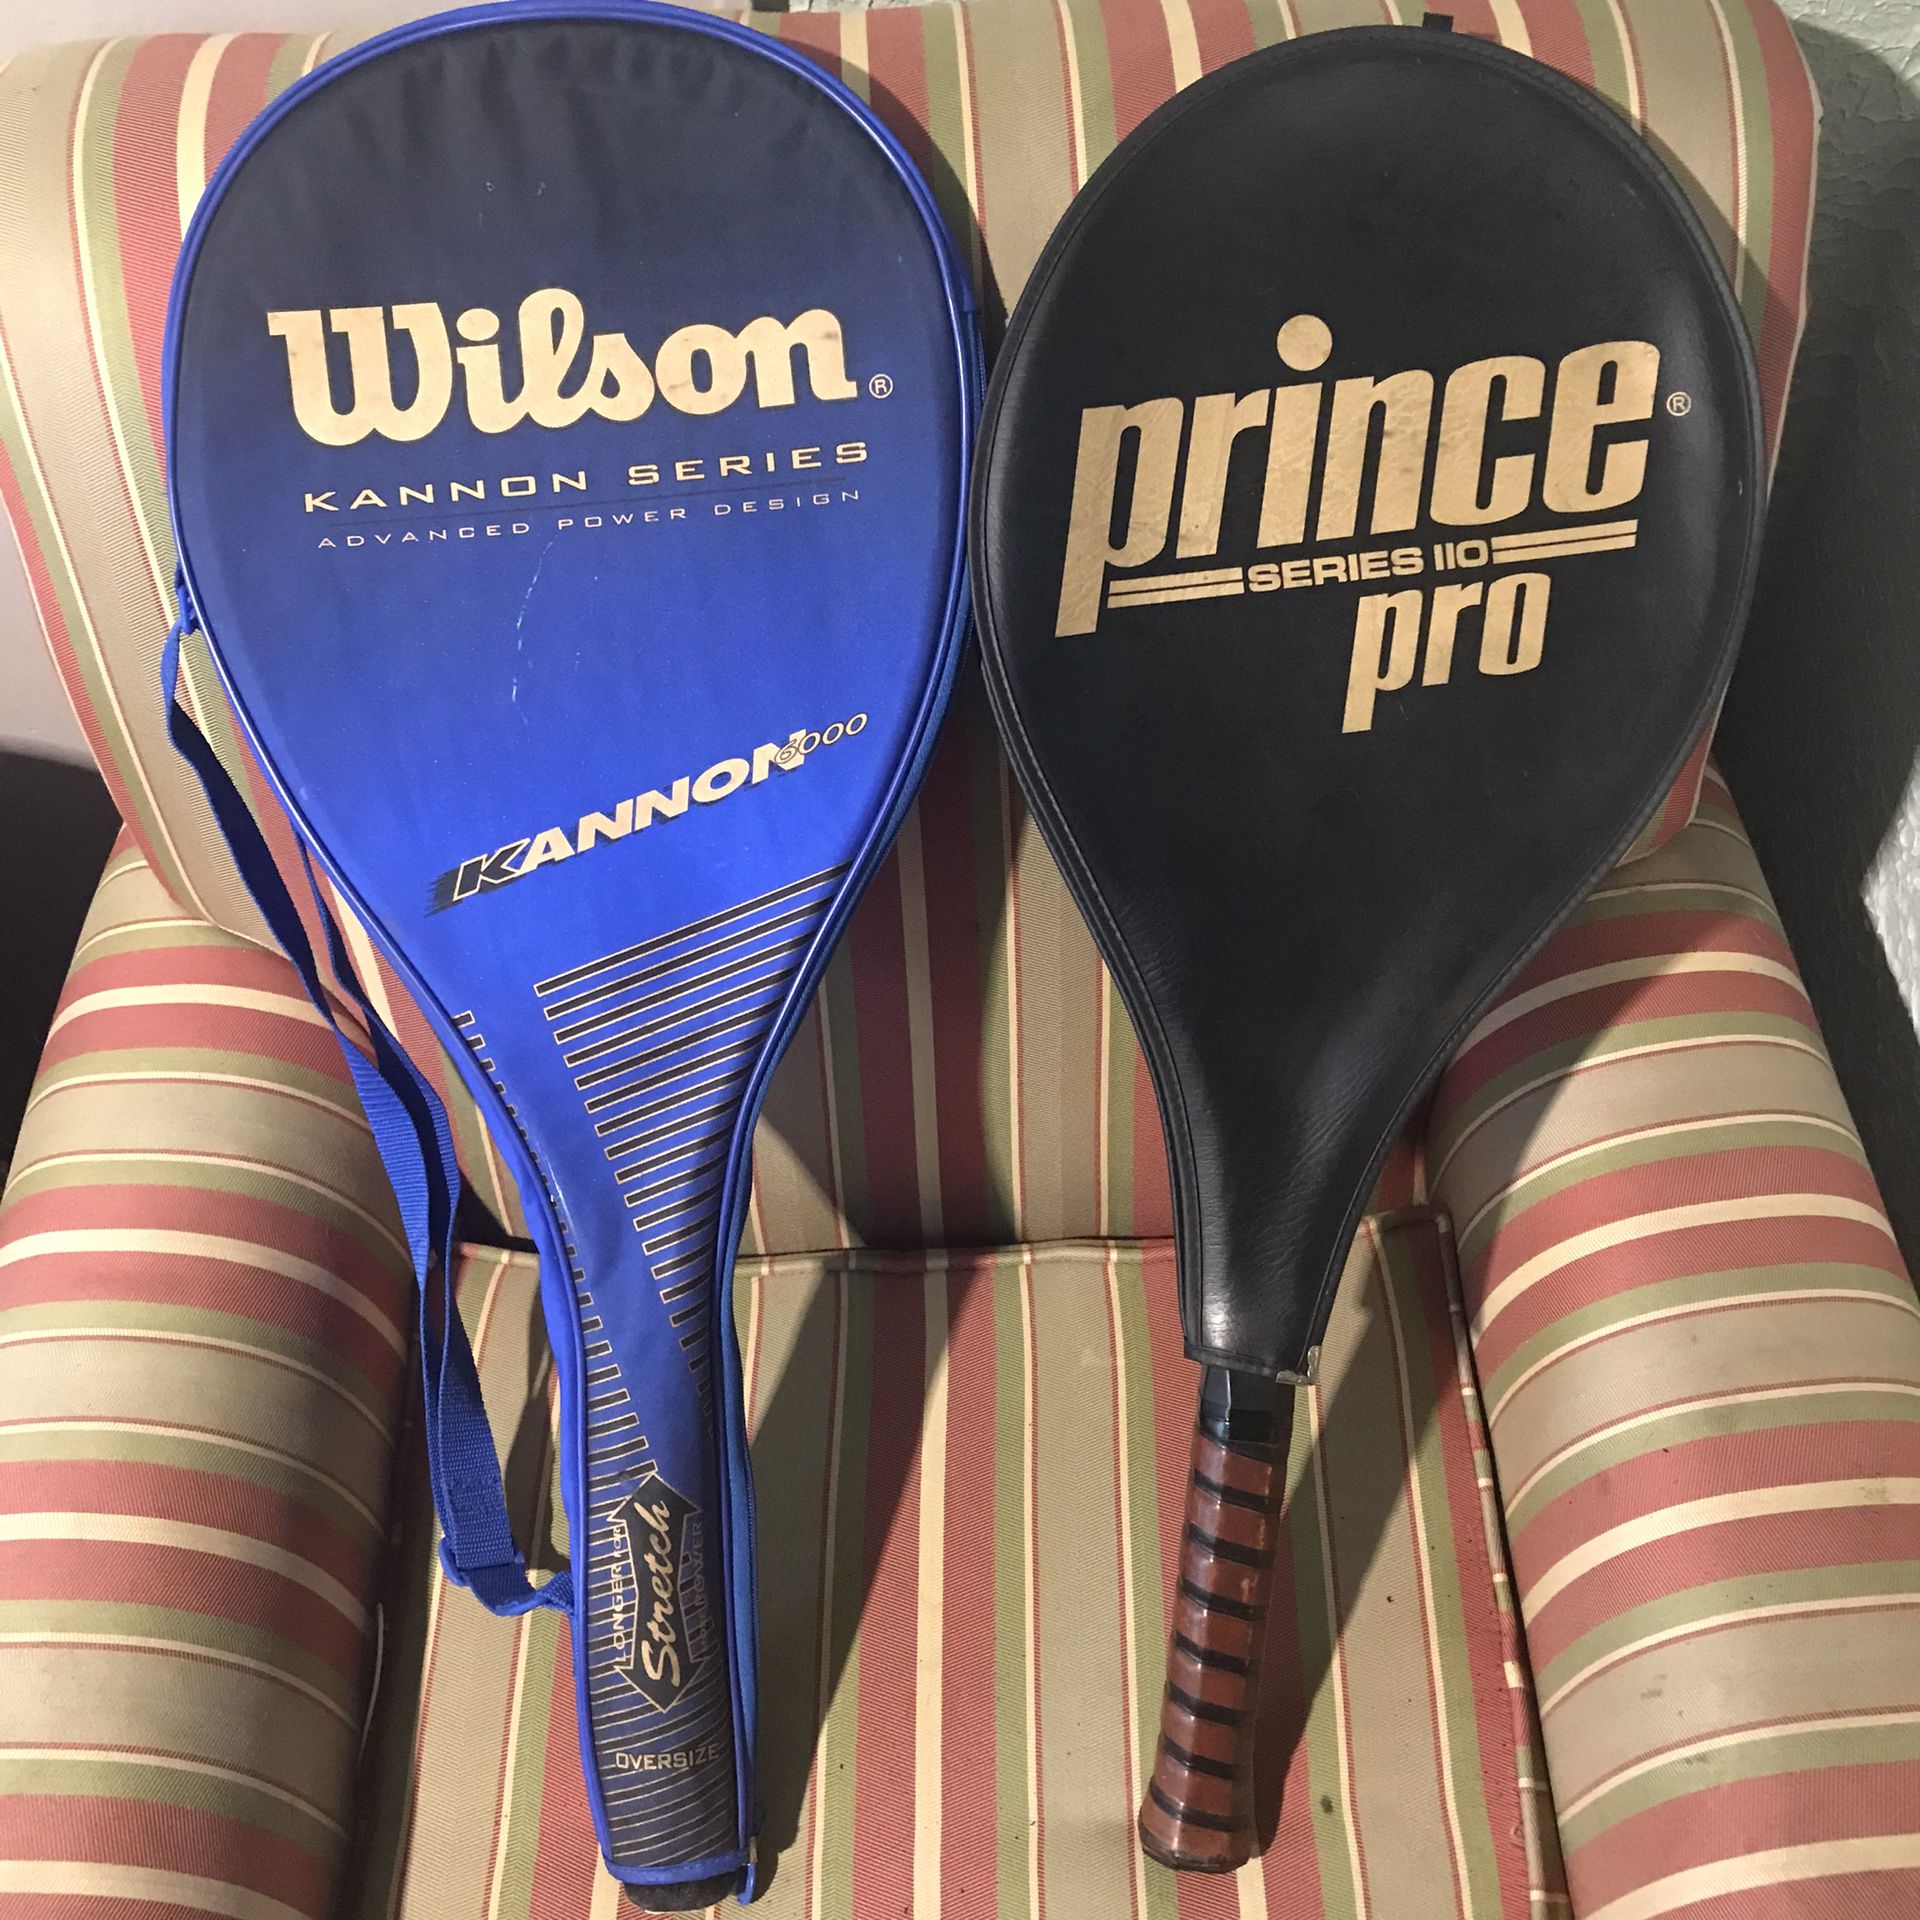 Tennis Rackets Lot Of 2 Prince Pro Series 110 & Wilson Kannon 6000 Fused Graphite